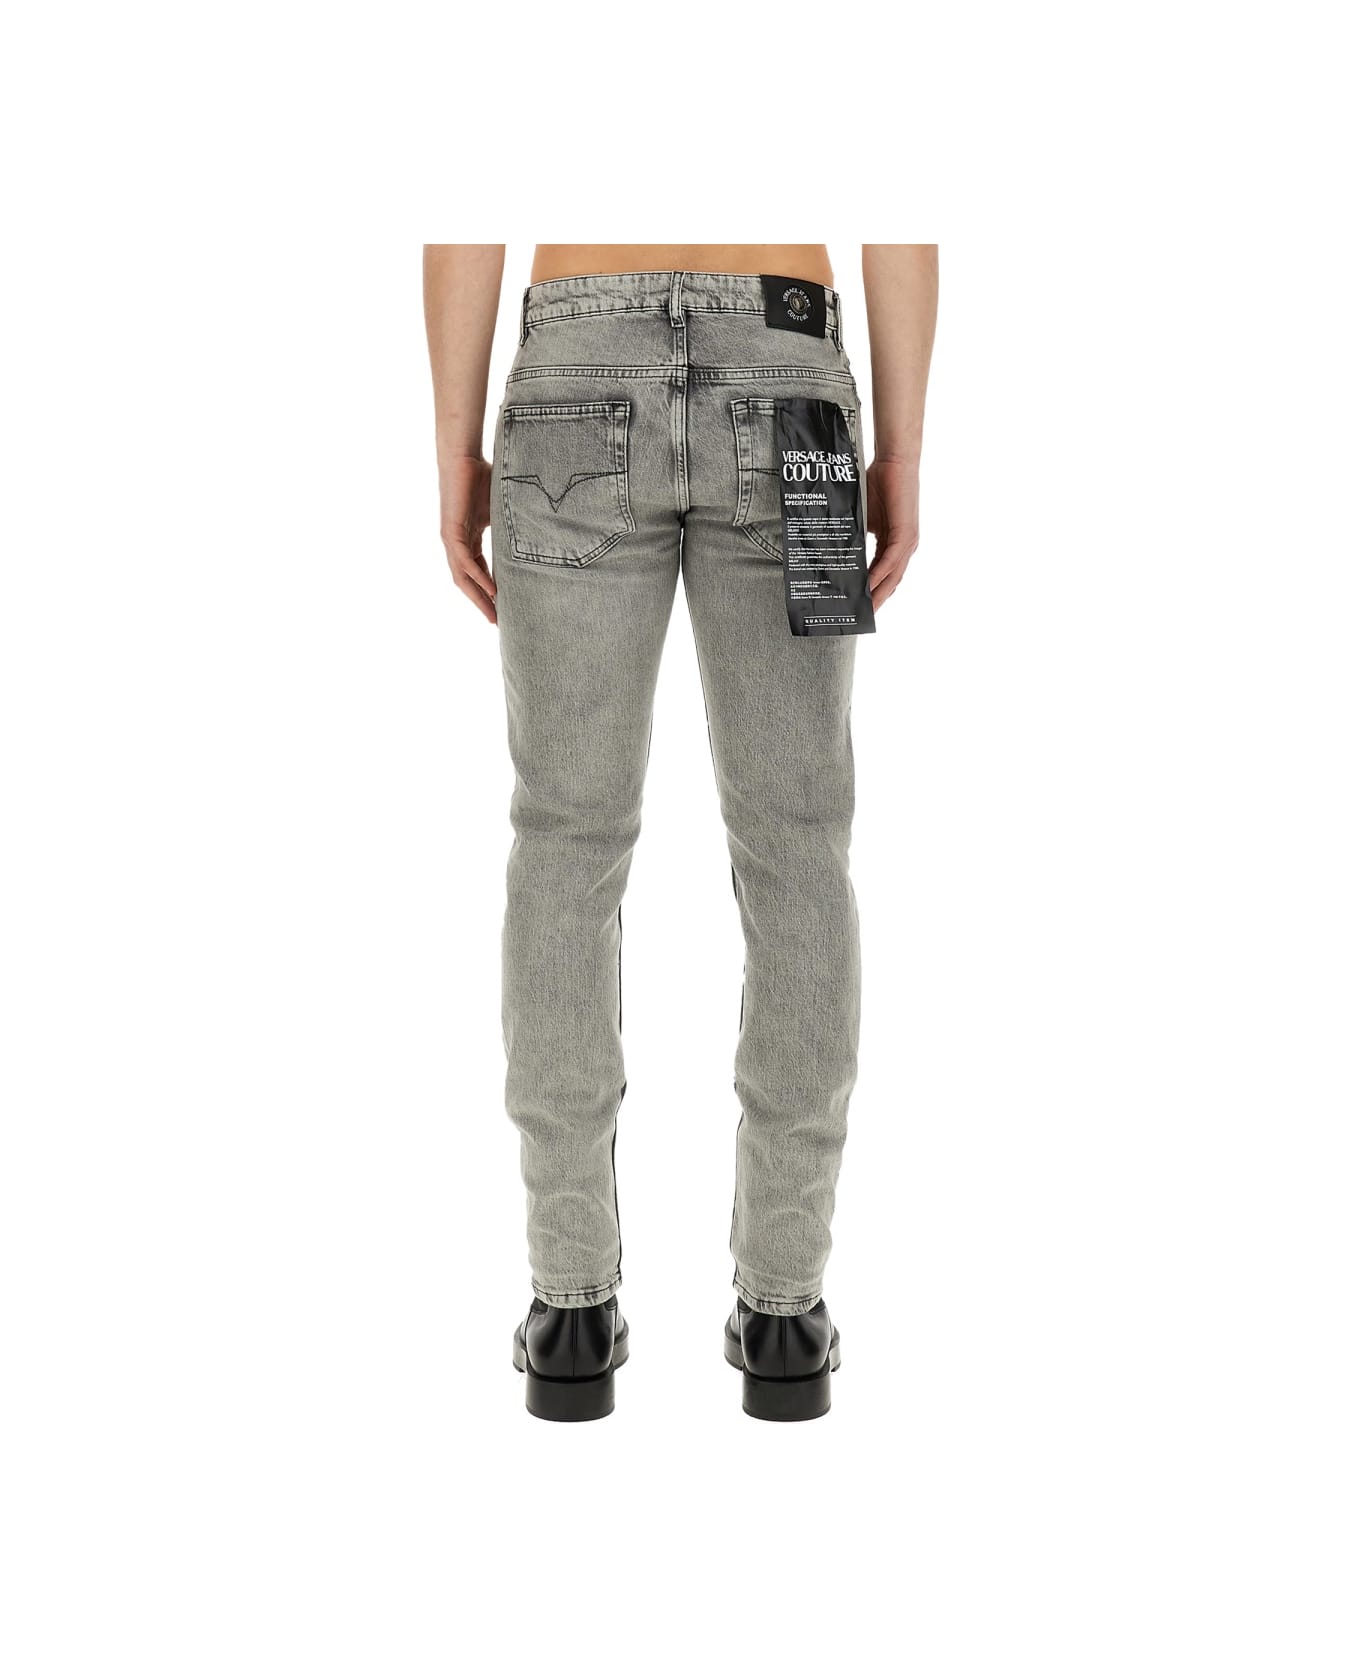 Versace Jeans Couture Slim Fit Jeans - GREY